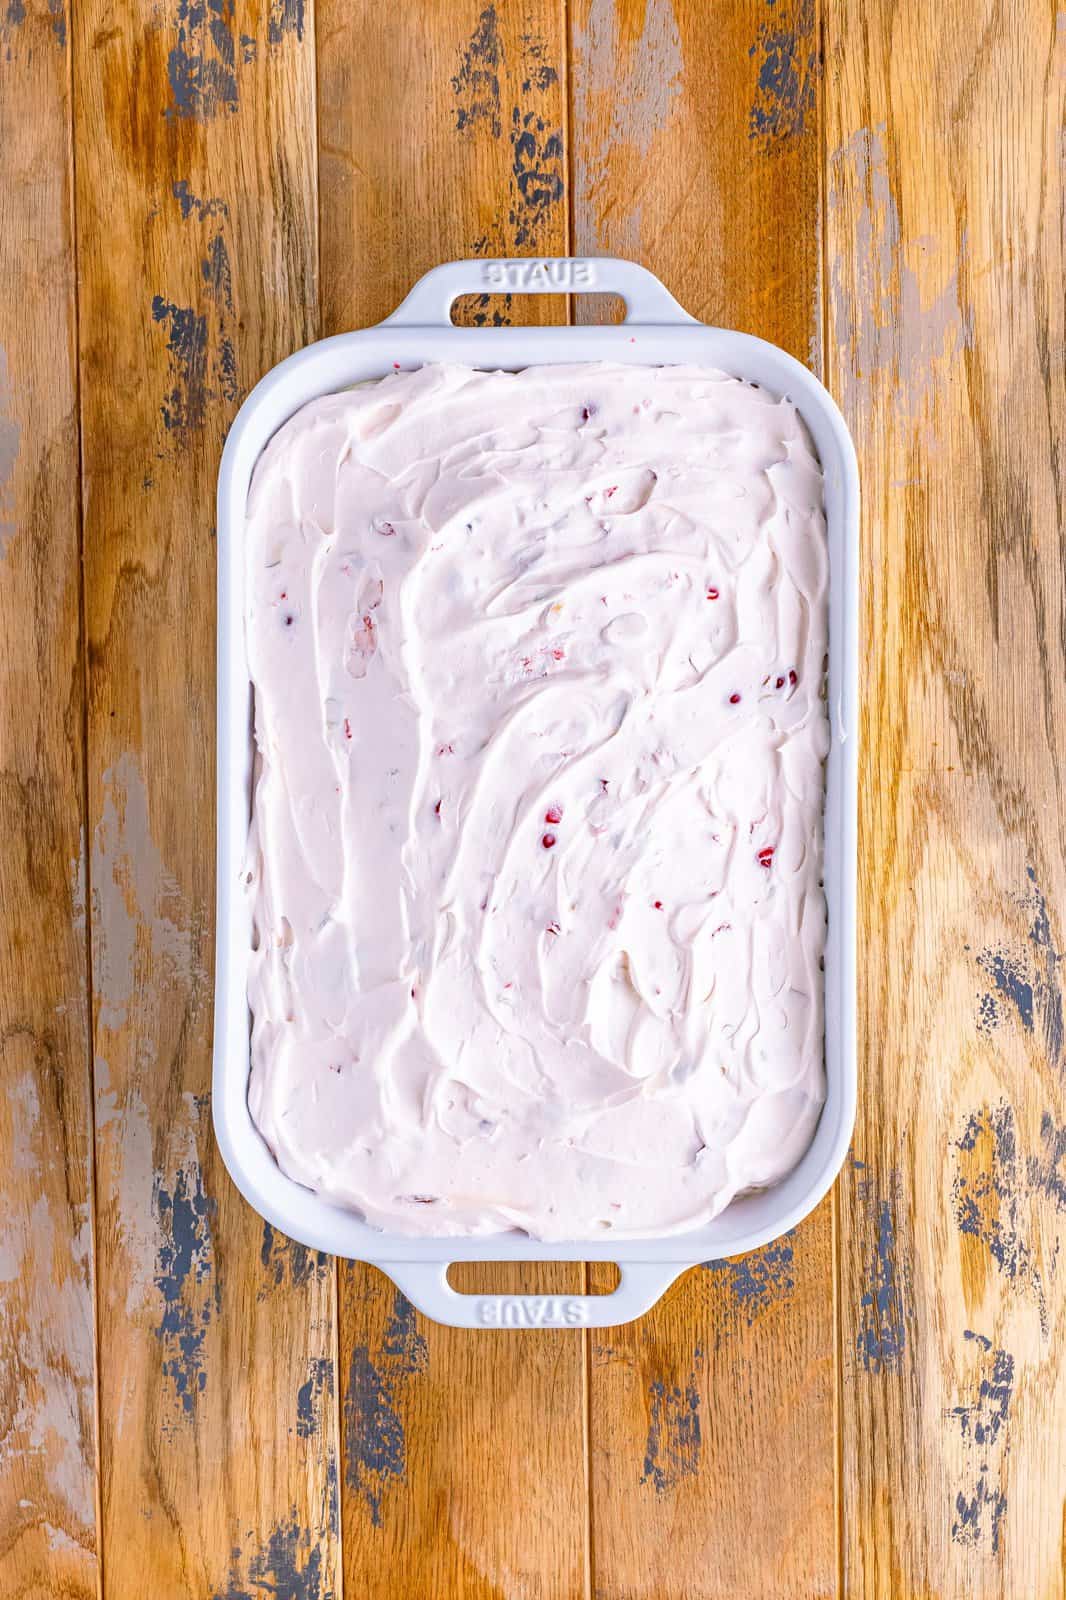 cherry whipped topping spread evenly on top of cake. 